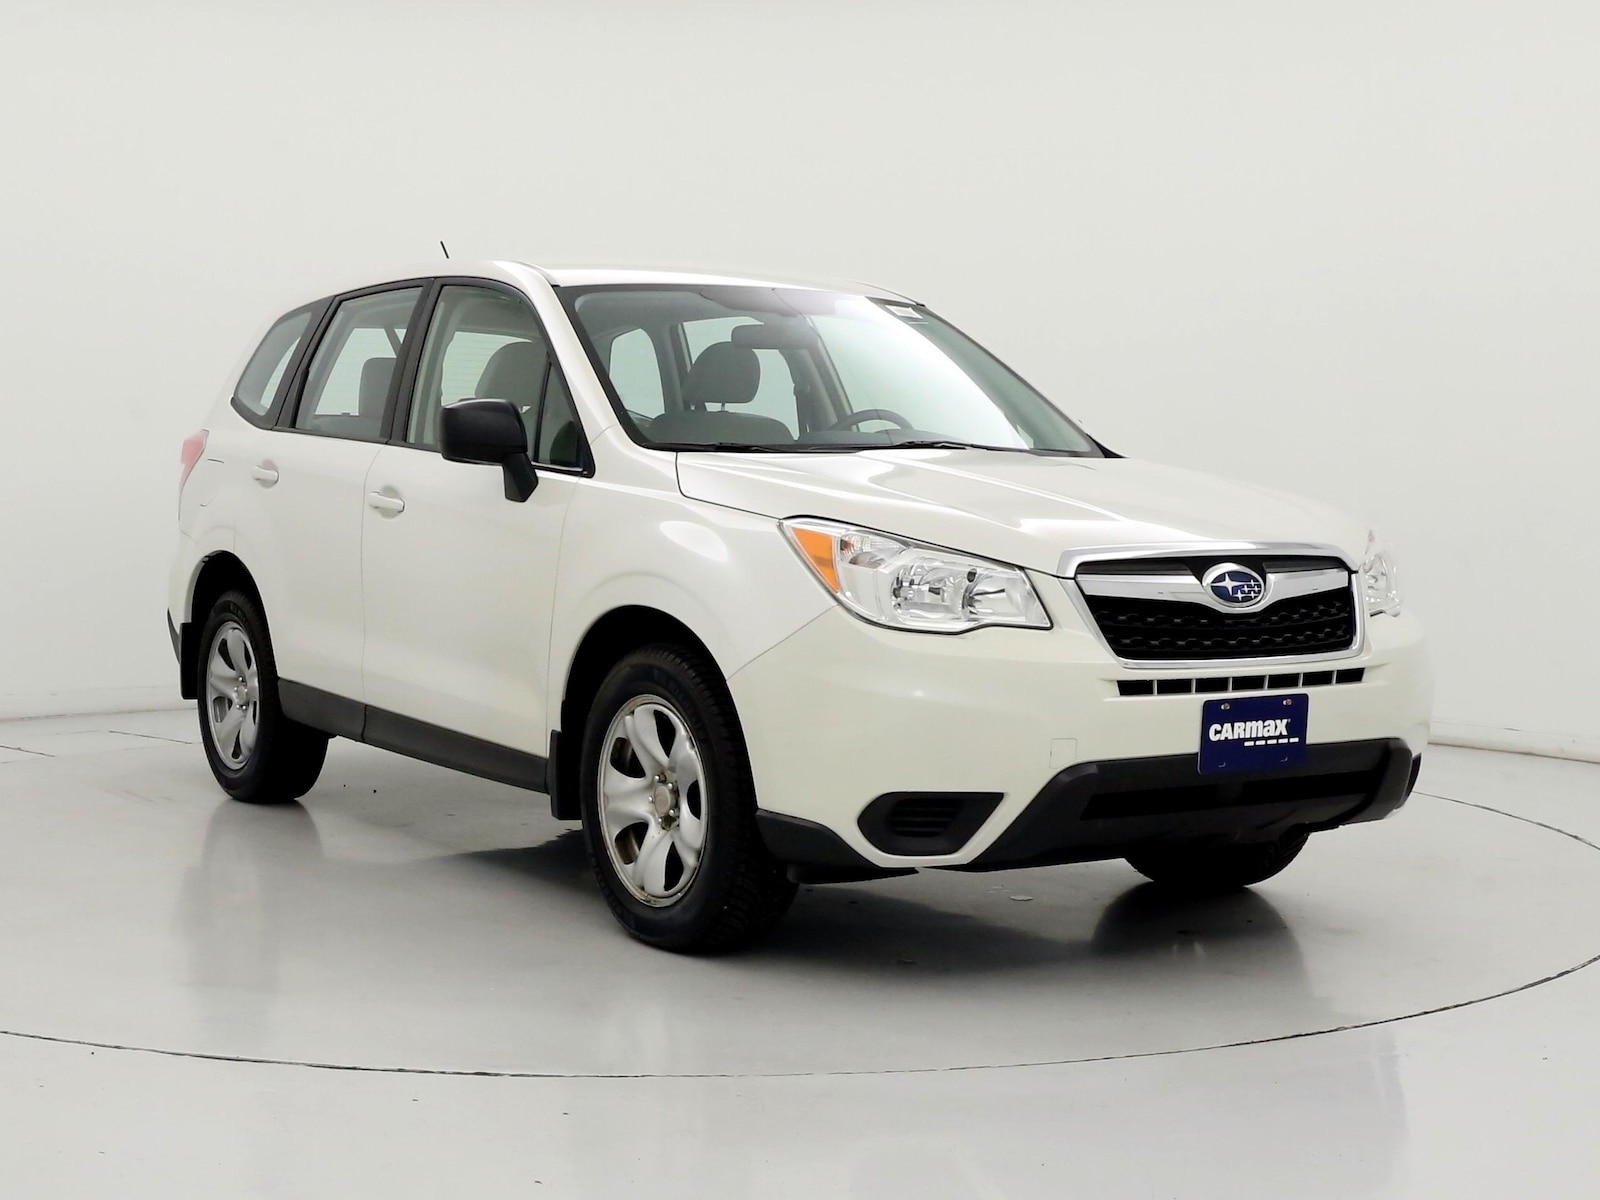 Used 2014 Subaru Forester i with VIN JF2SJAAC7EH445382 for sale in Spokane Valley, WA